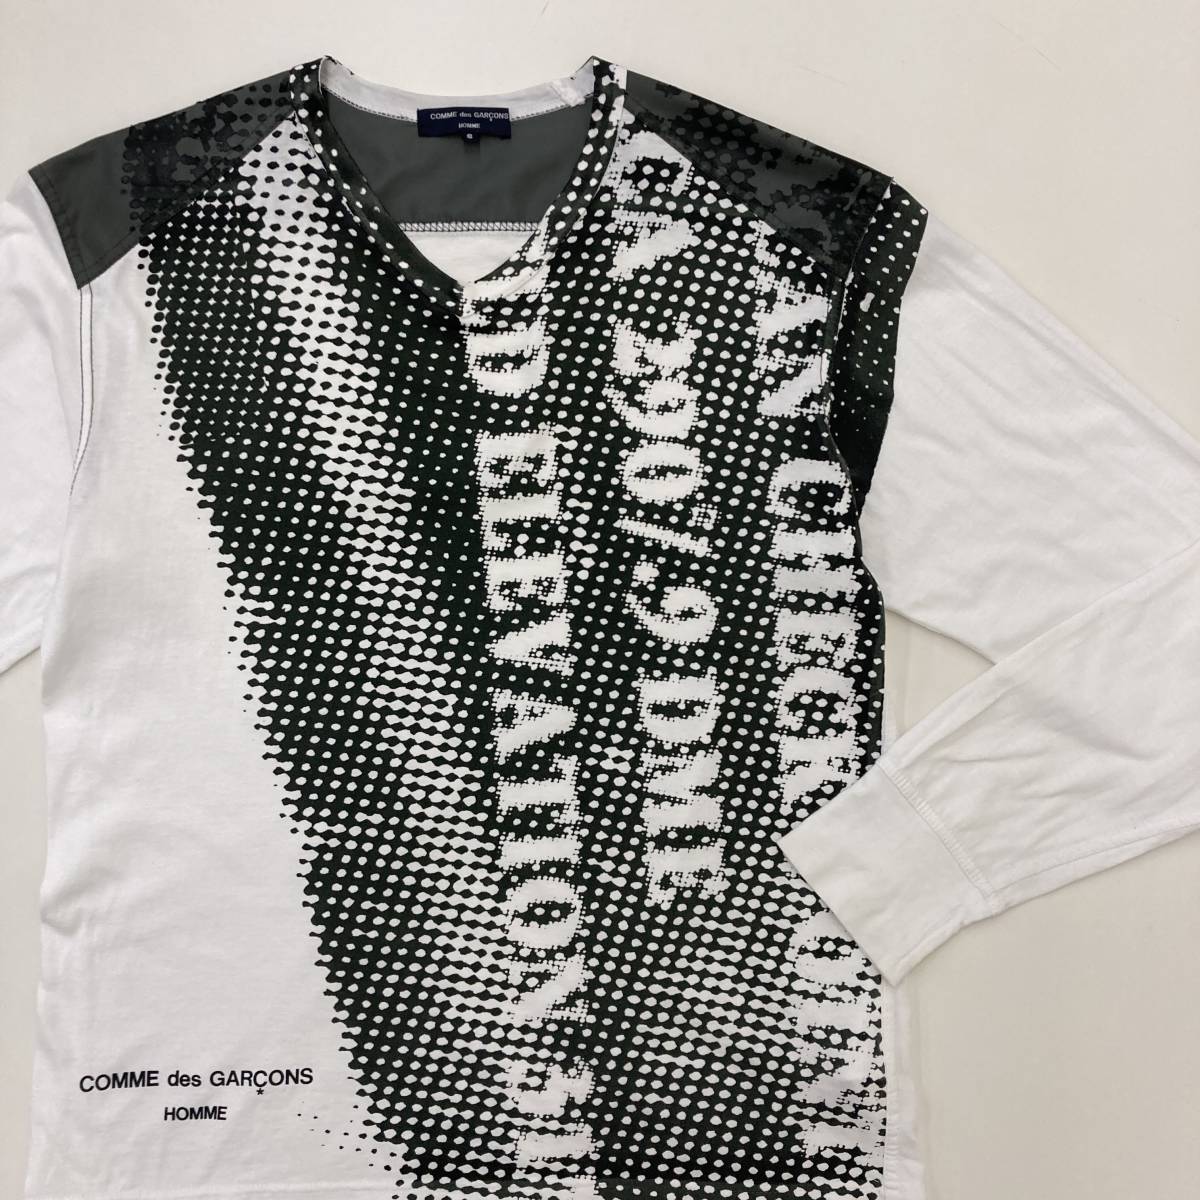 AD2007 COMME des GARCONS HOMME ナイロン 異素材 切替 ロゴ 長袖 カットソー 白 コムデギャルソンオム Tシャツ ロンT archive 3100207_画像3